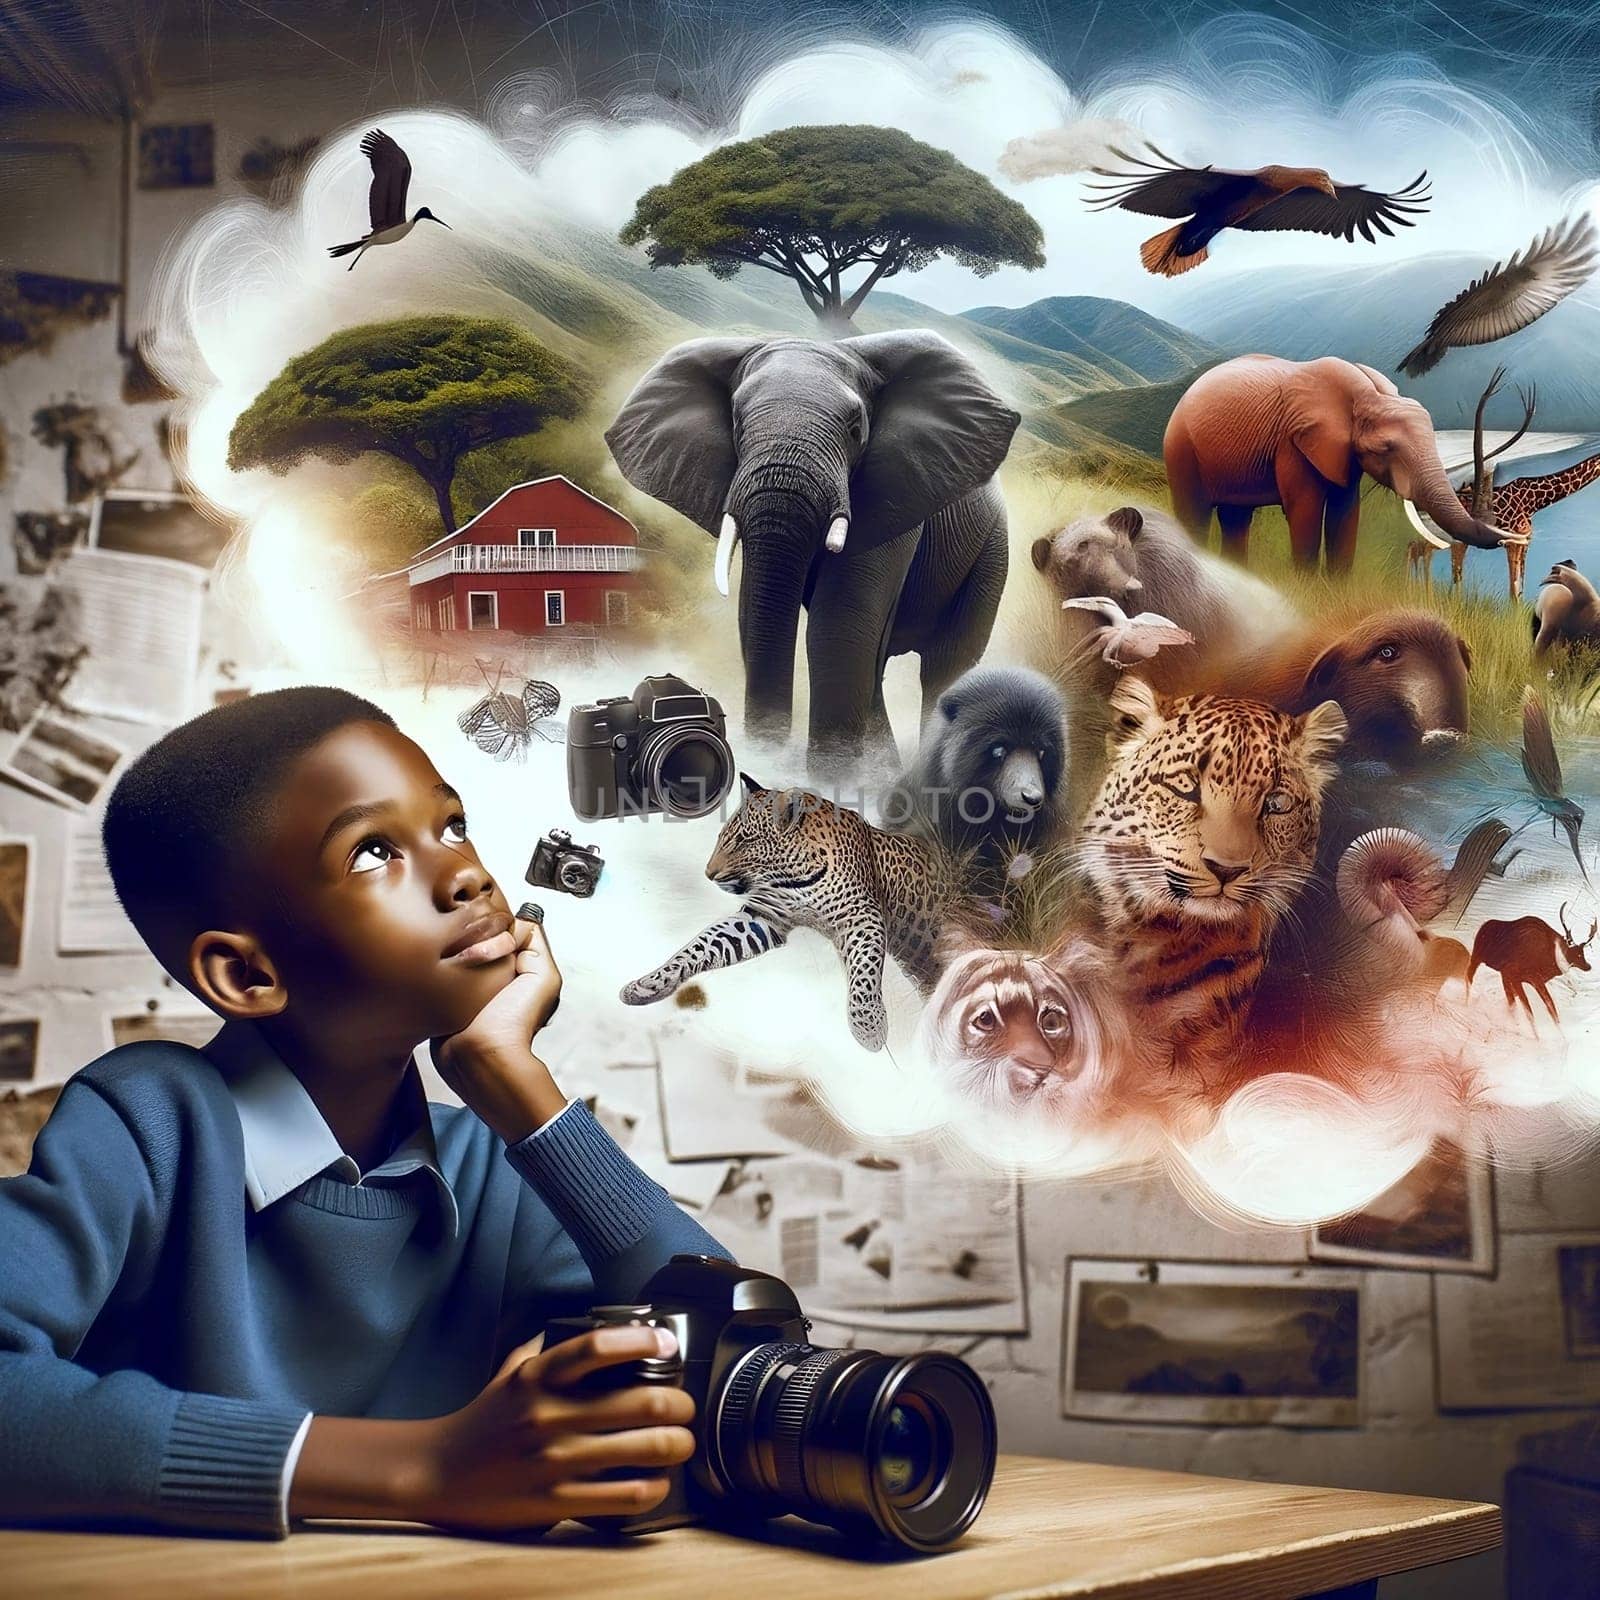 A young boy sits at a table holding a camera, looking up and dreaming about becoming famous wildlife photgrapher